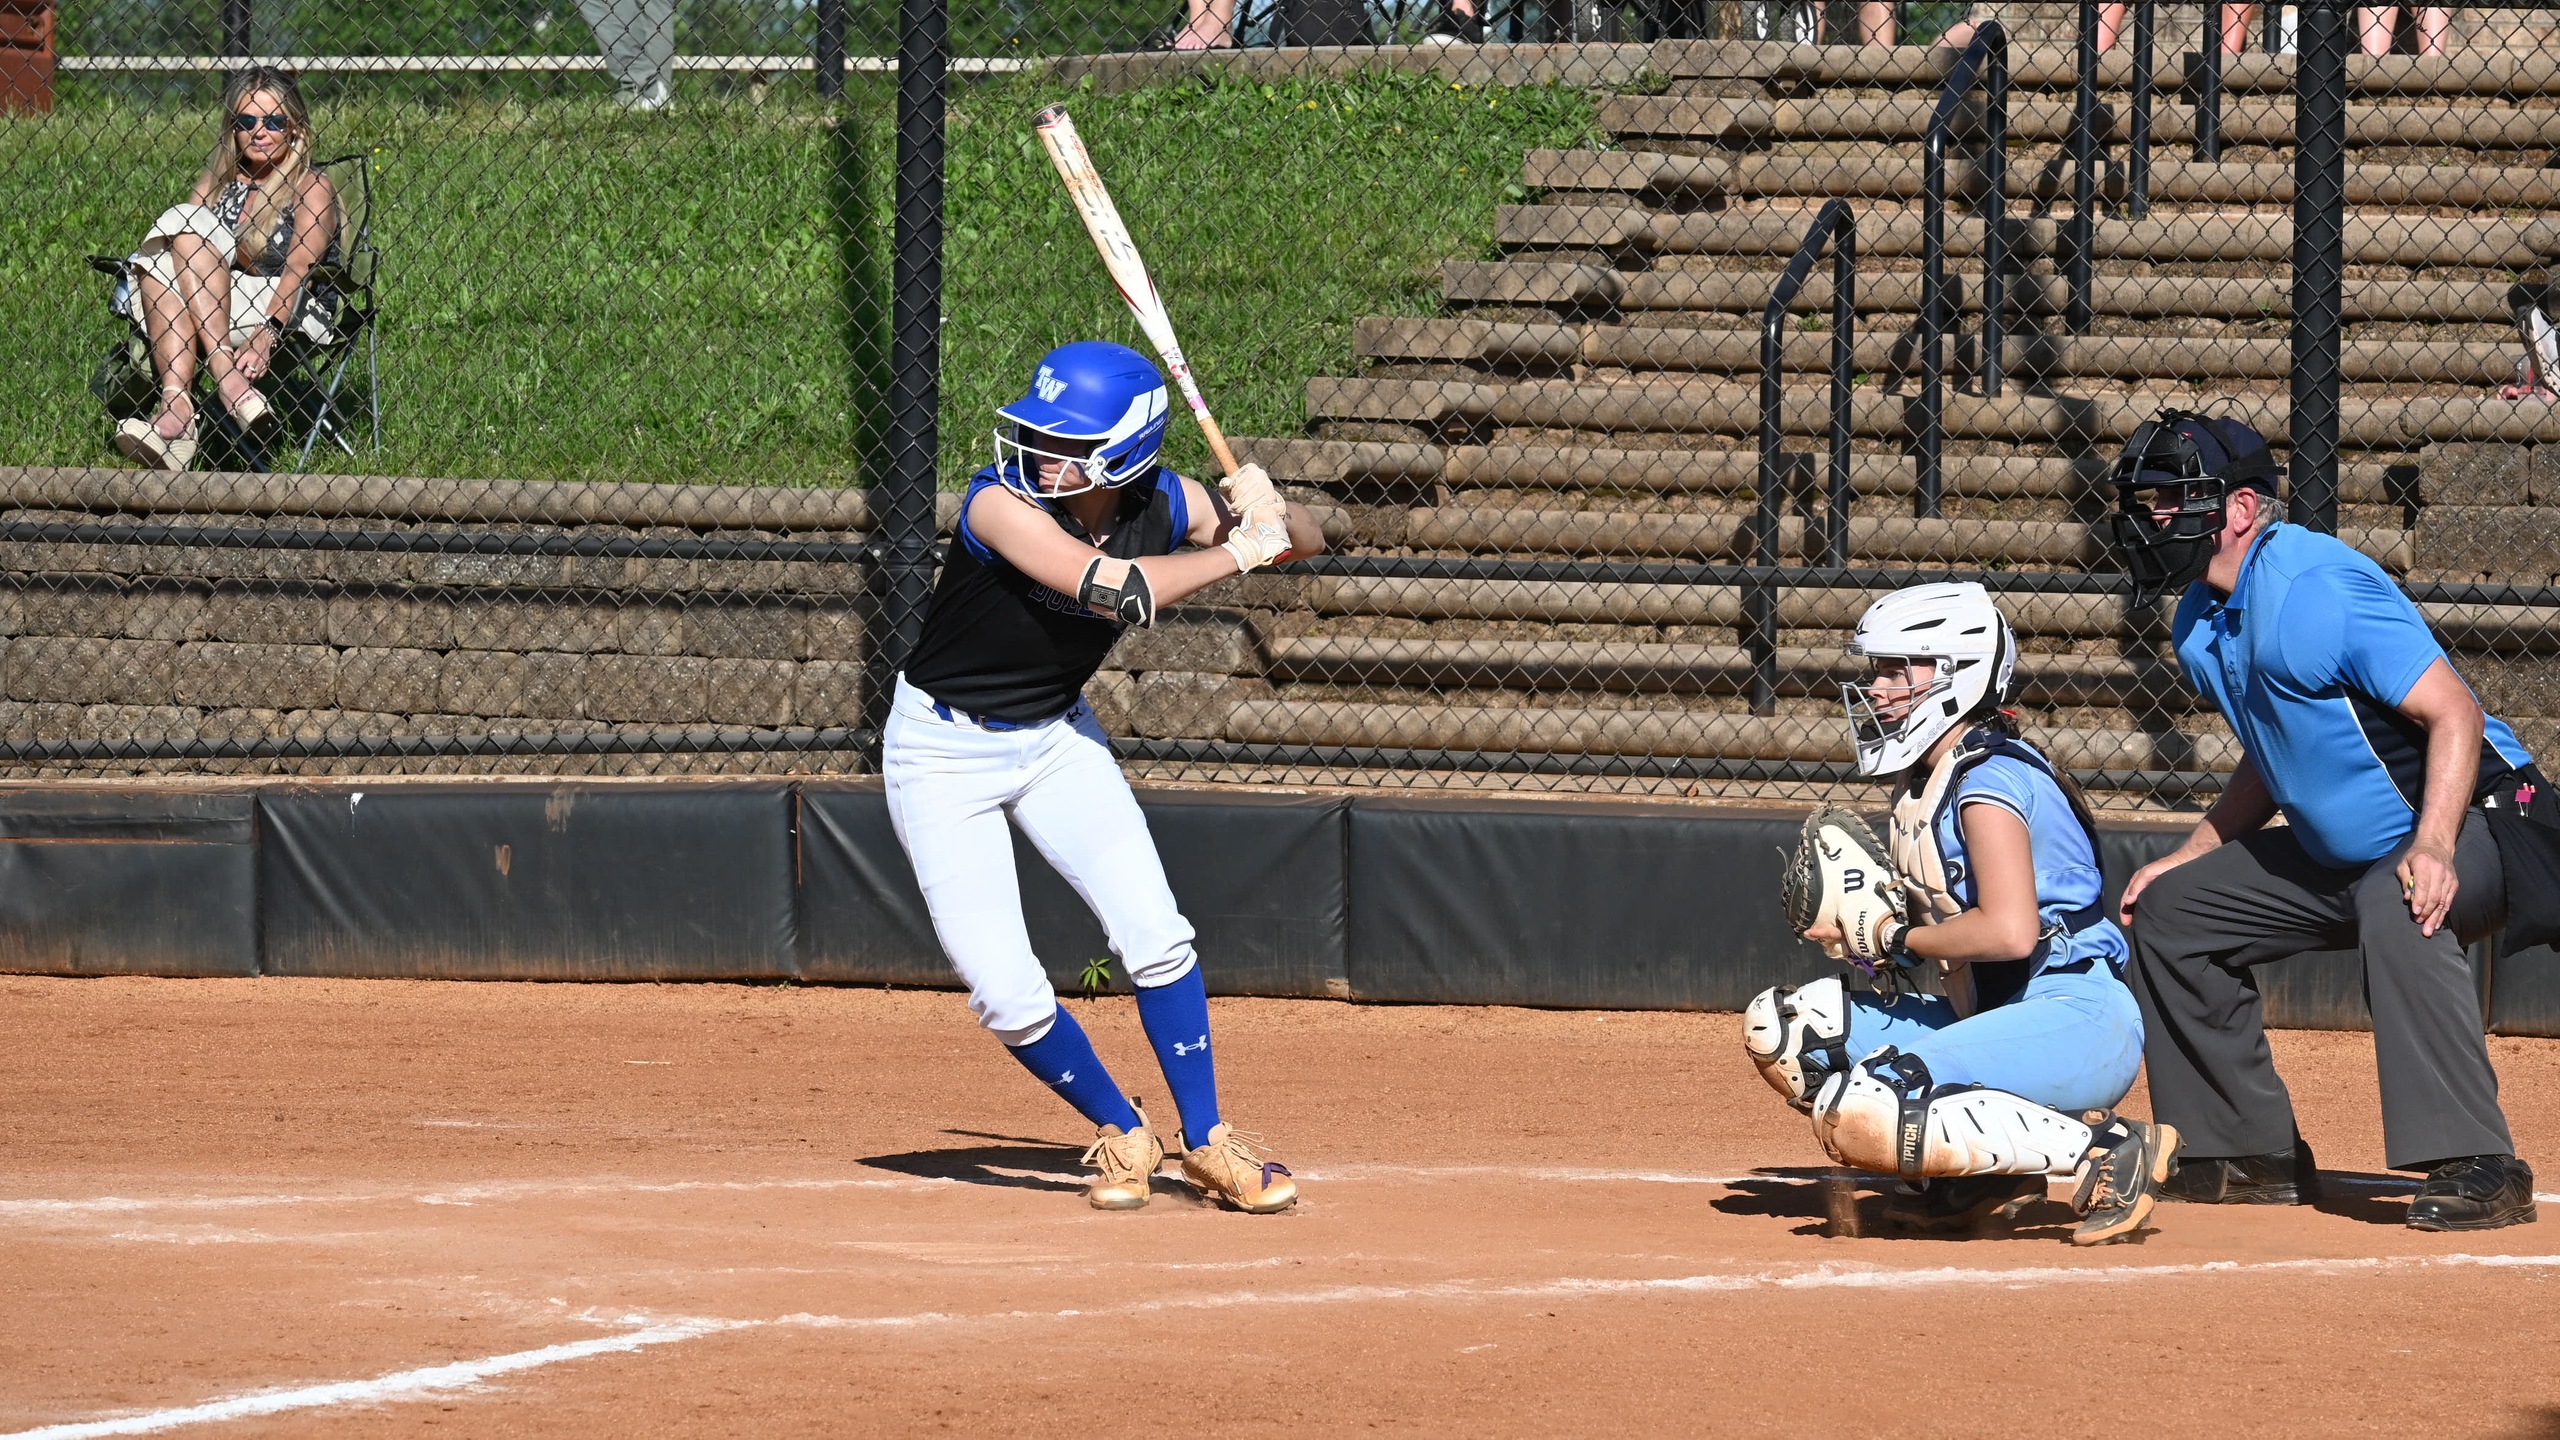 No. 3 Seed Softball Uses Extra Inning Home Run to Defeat No. 2 seed Johnson